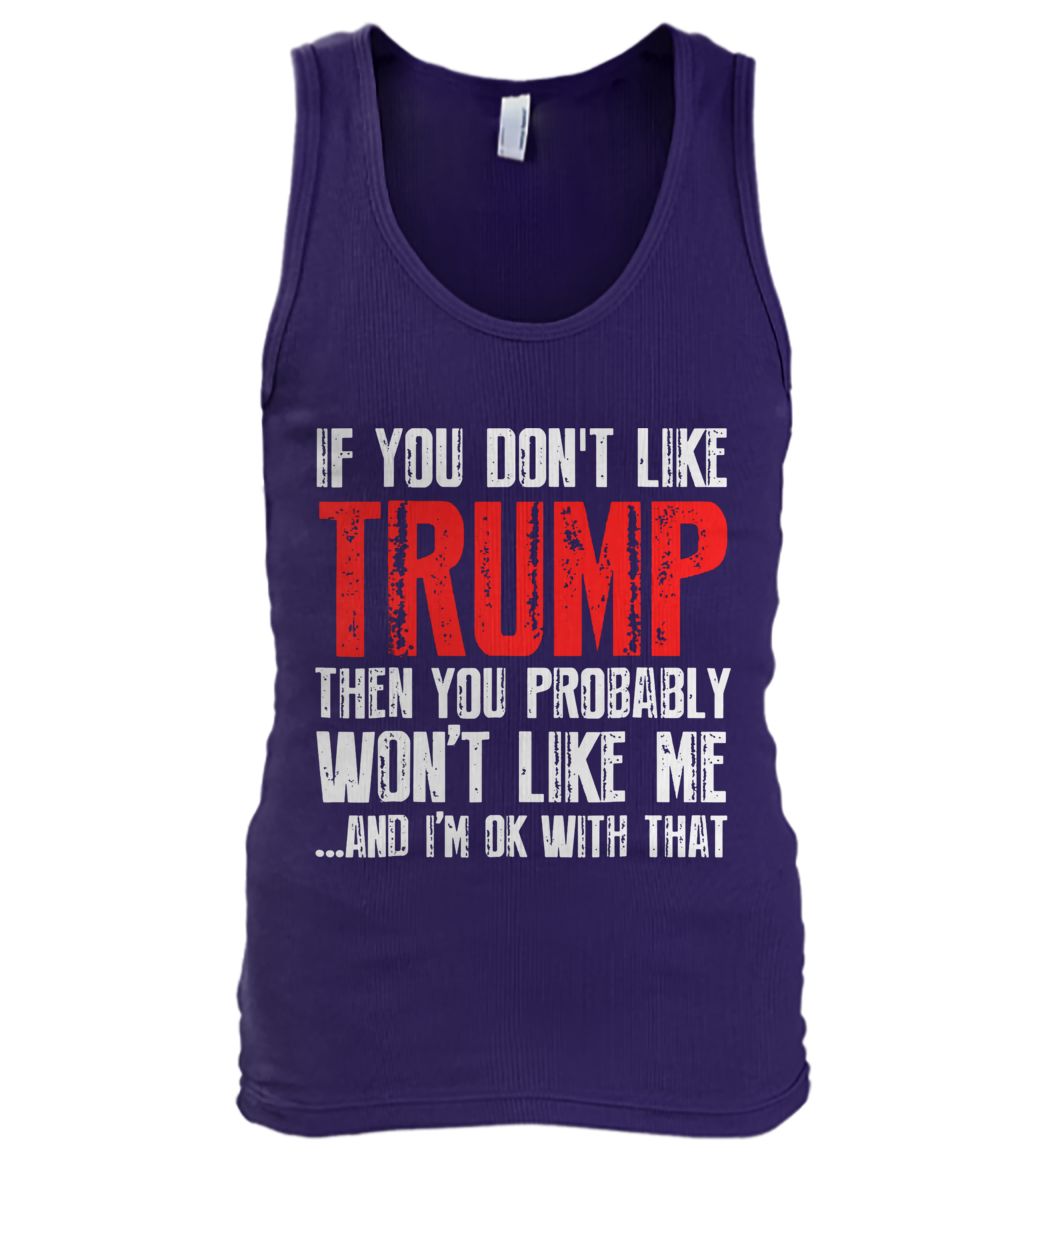 If you don’t like trump then you probably won’t like me and I’m ok with that men's tank top